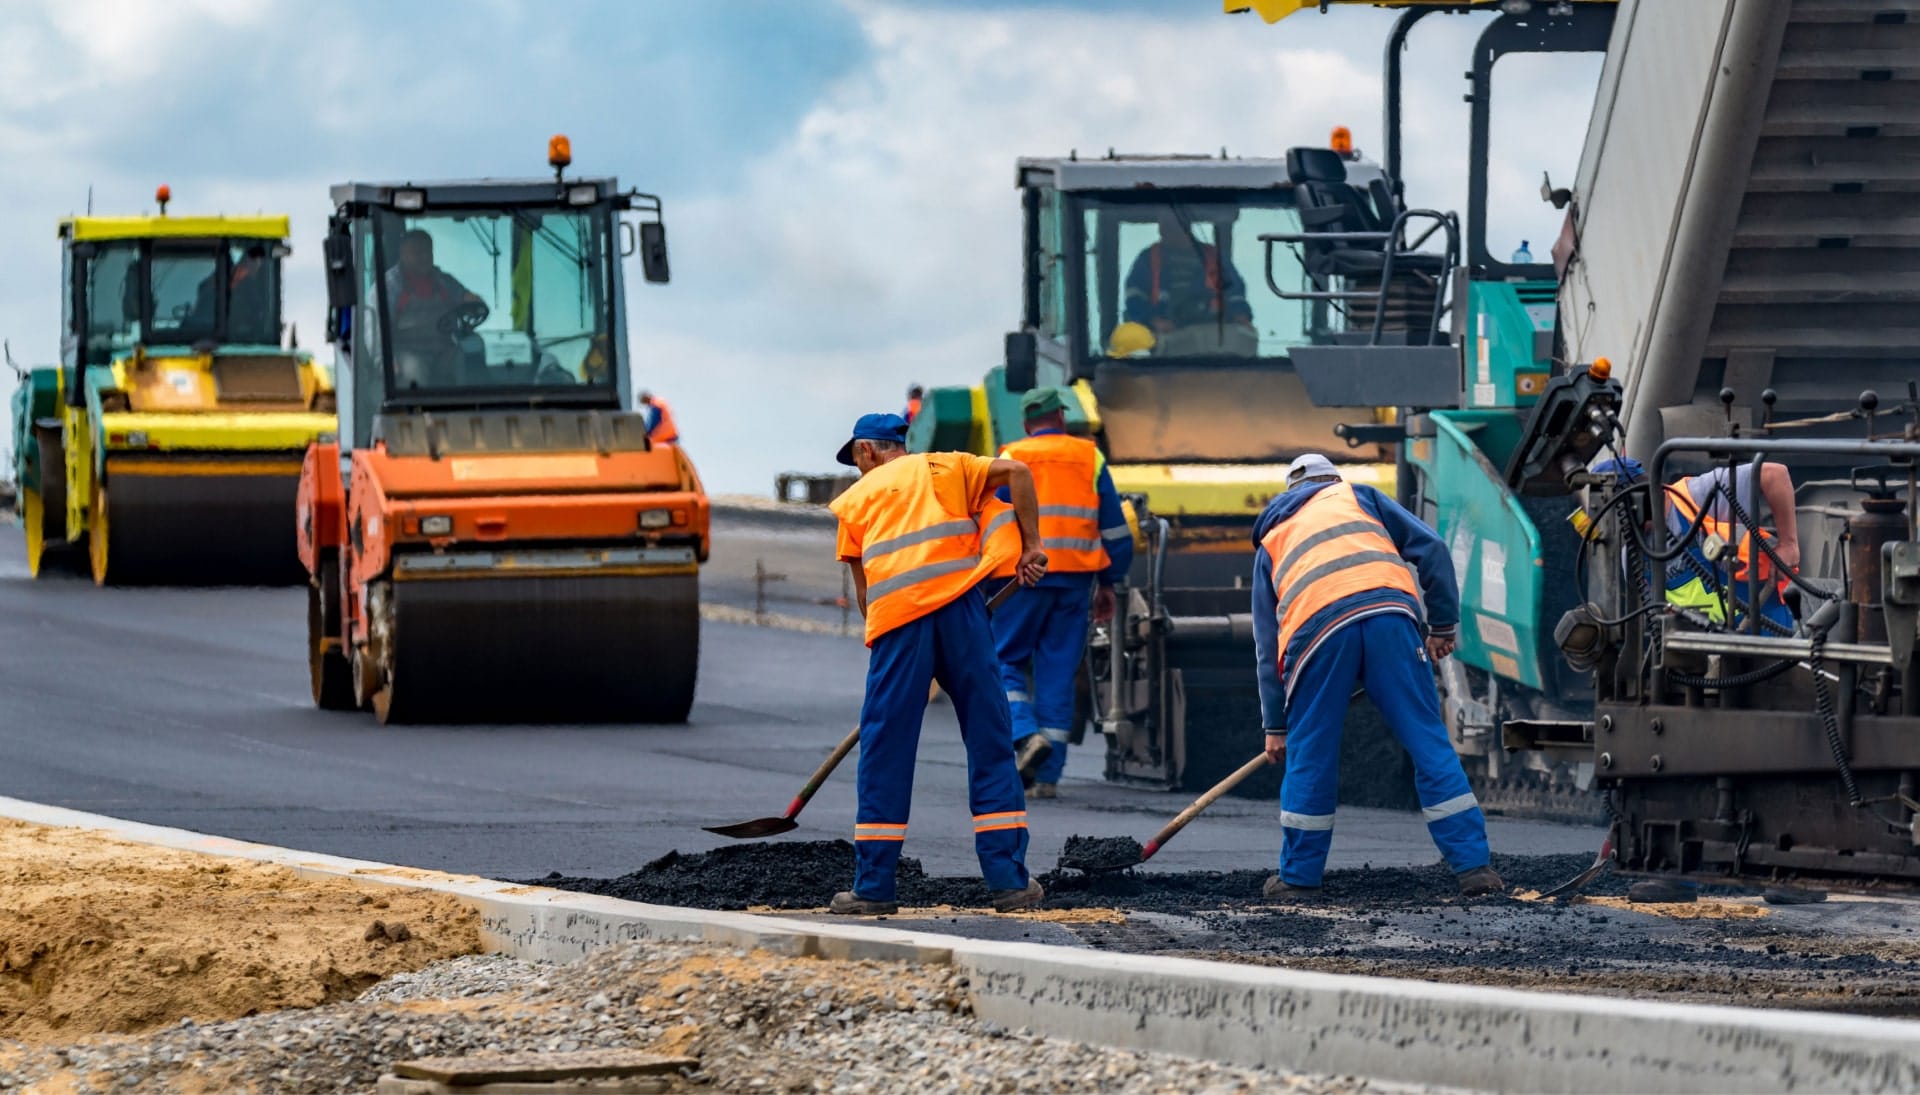 A group of construction workers wearing hard hats and reflective vests, operating heavy machinery and laying down asphalt on a newly excavated road in Saint Petersburg, showcasing the intricate process of building a sturdy and smooth surface.